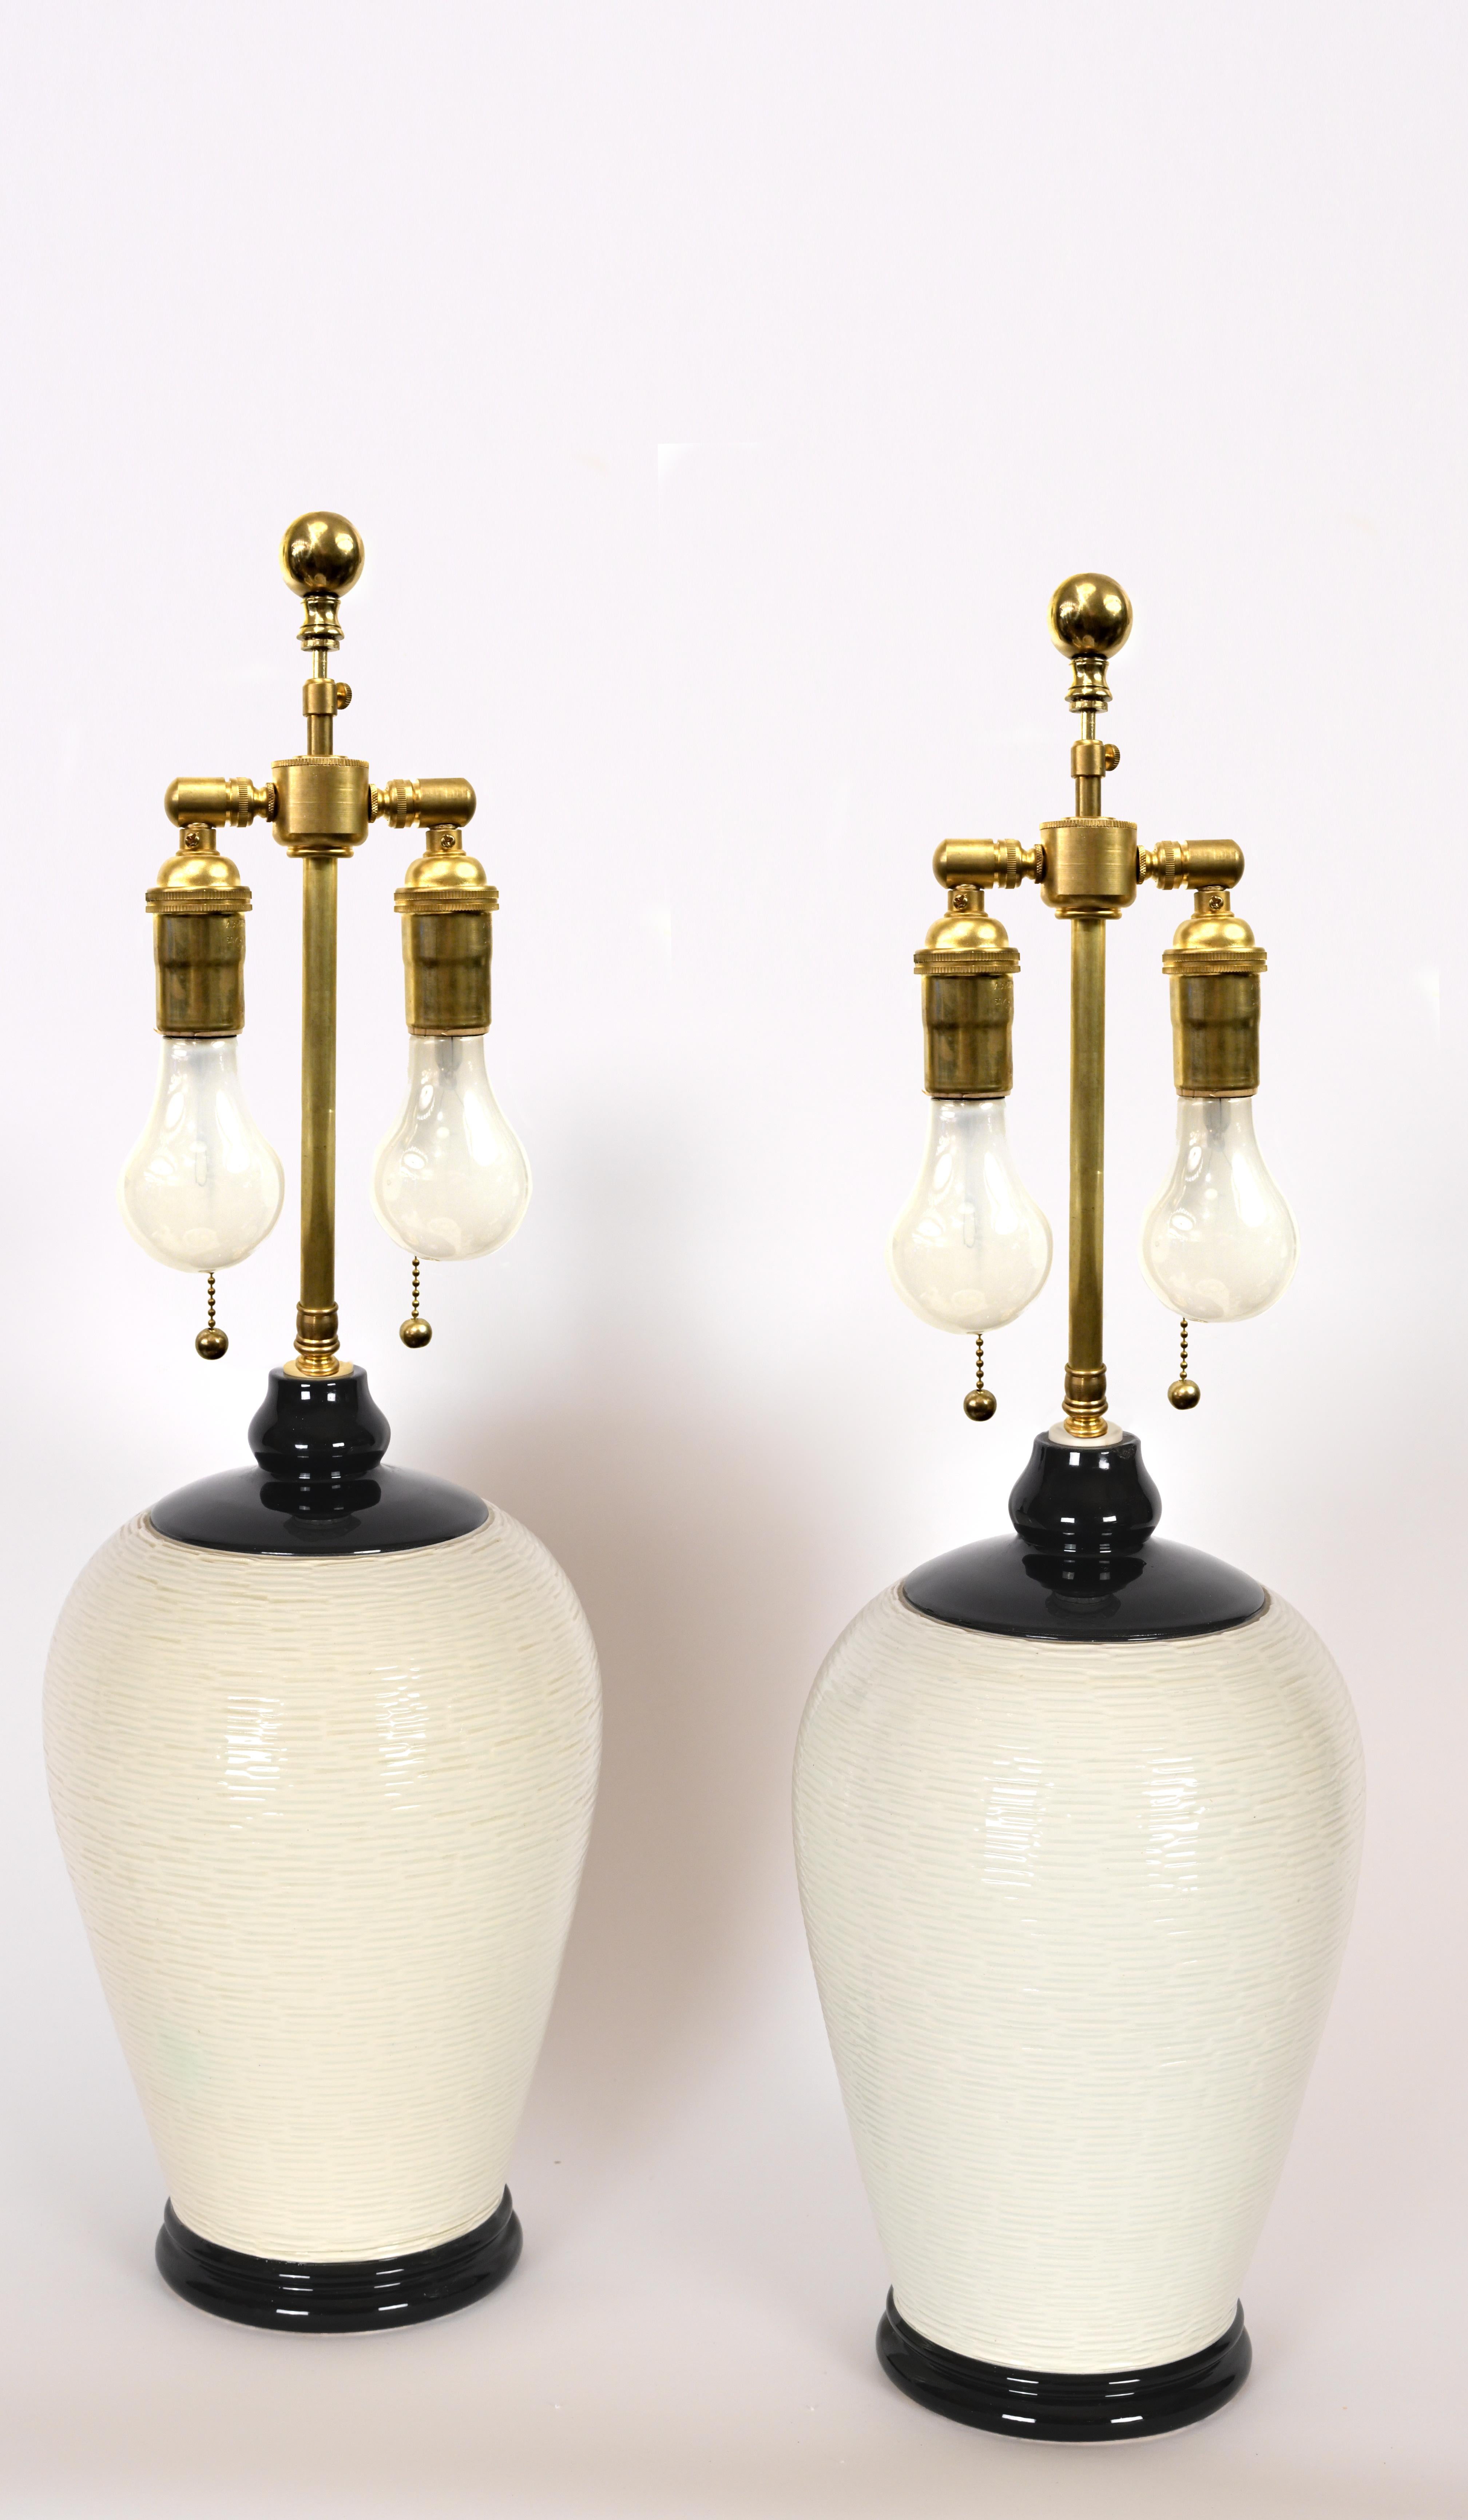 A pair of white ceramic lamps made by Nordiska Kompaniet having black accented top and bottom with ridging along the sides. Started in 1890, Nordiska Kompaniet is a luxury department store company that has collaborated with famous designers and